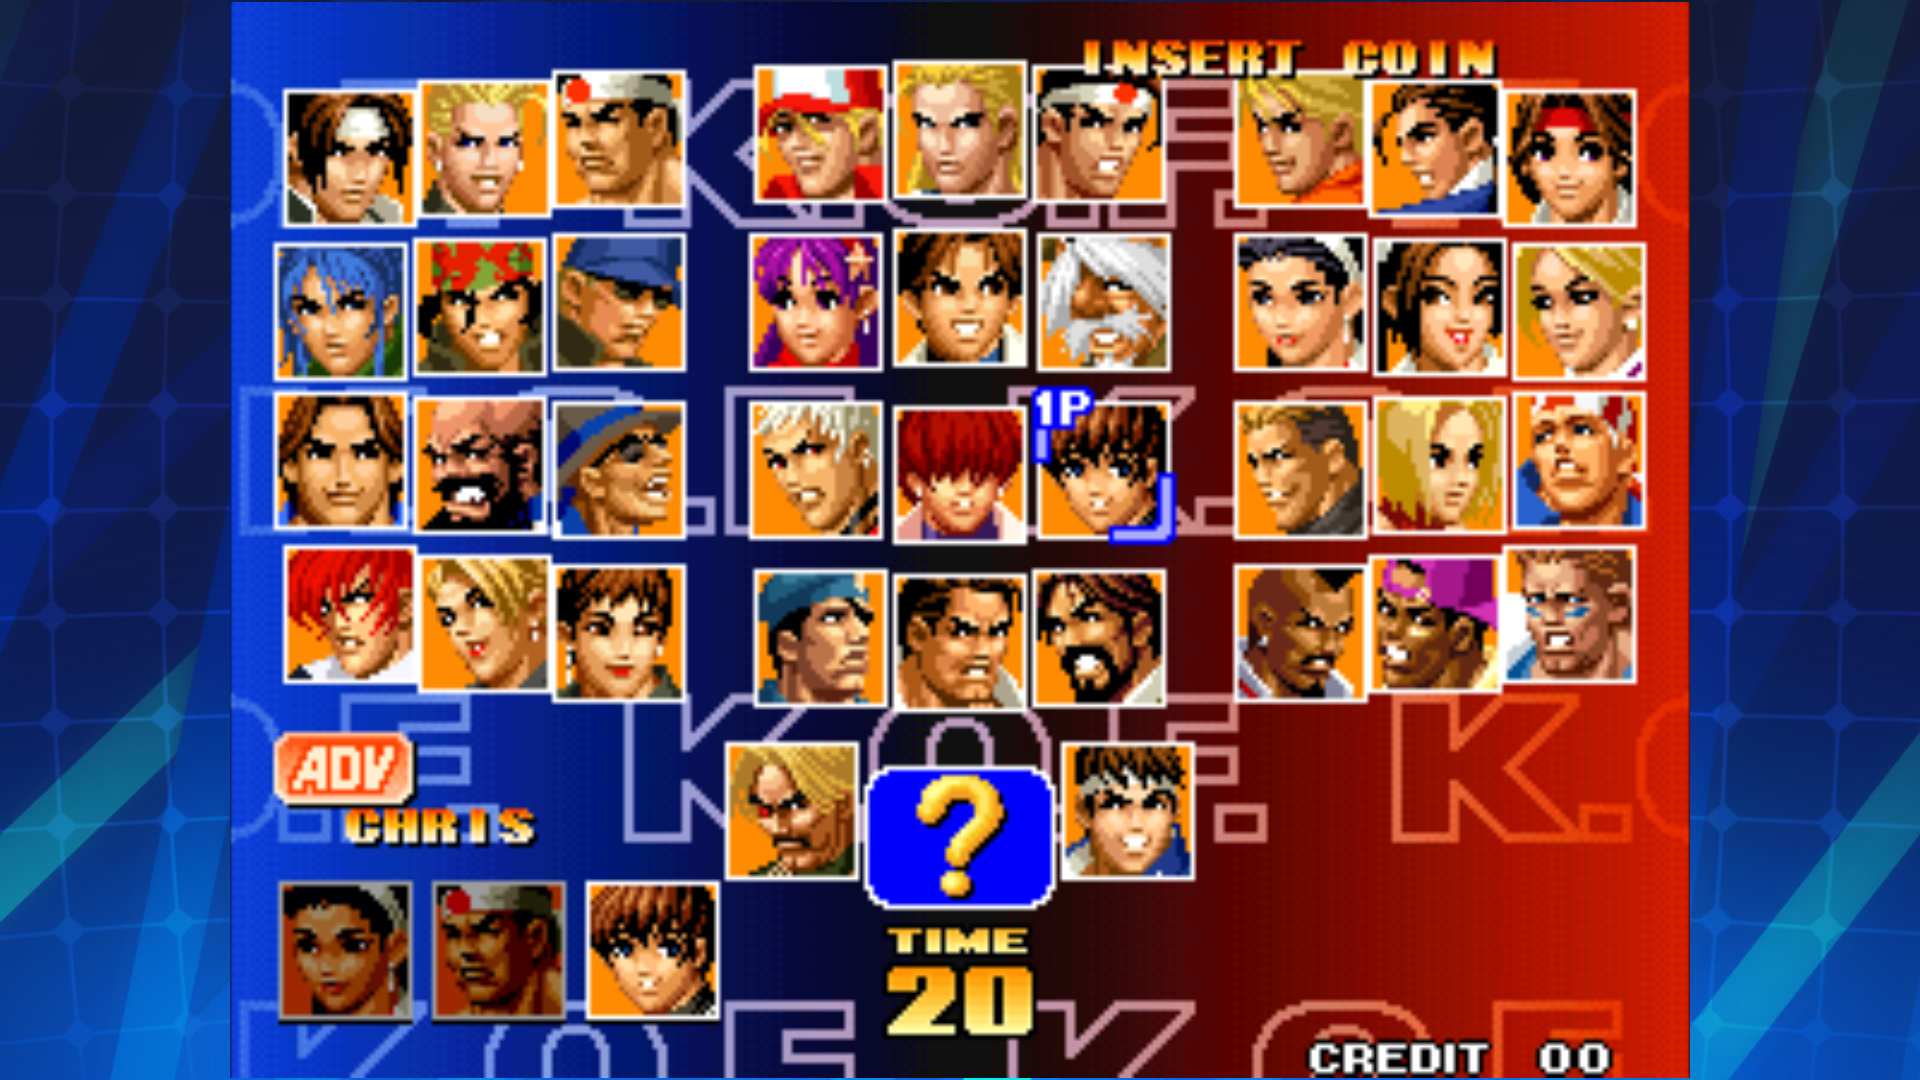 THE KING OF FIGHTERS '97 para Android - Download